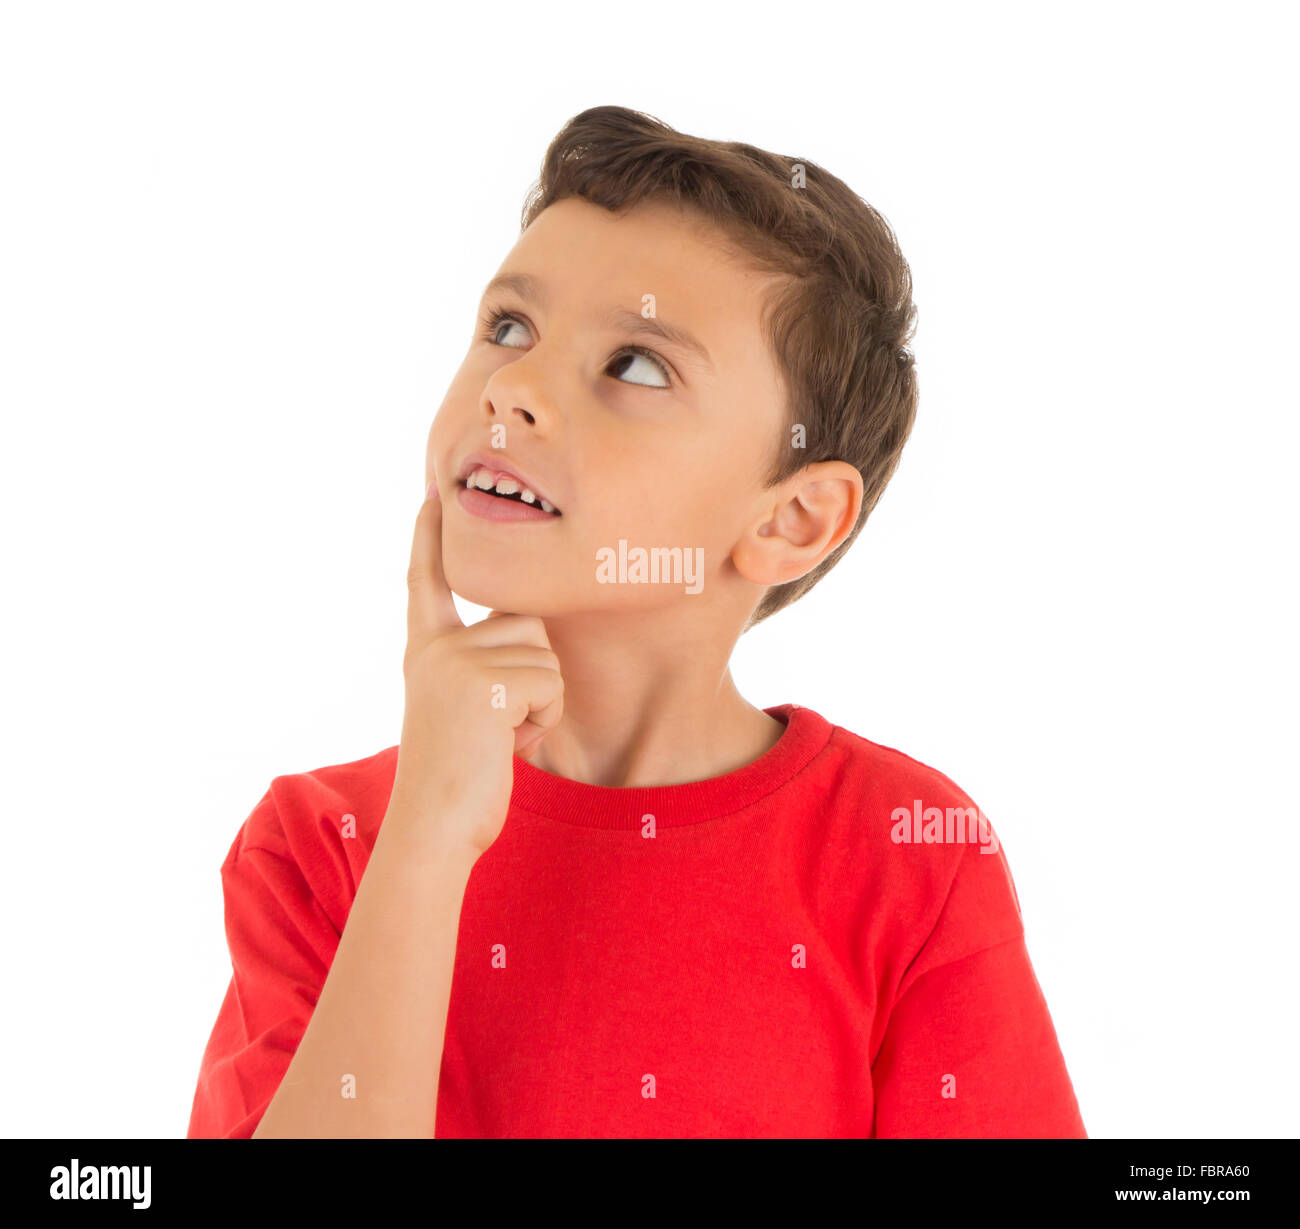 Kid looking up and thinking Stock Photo